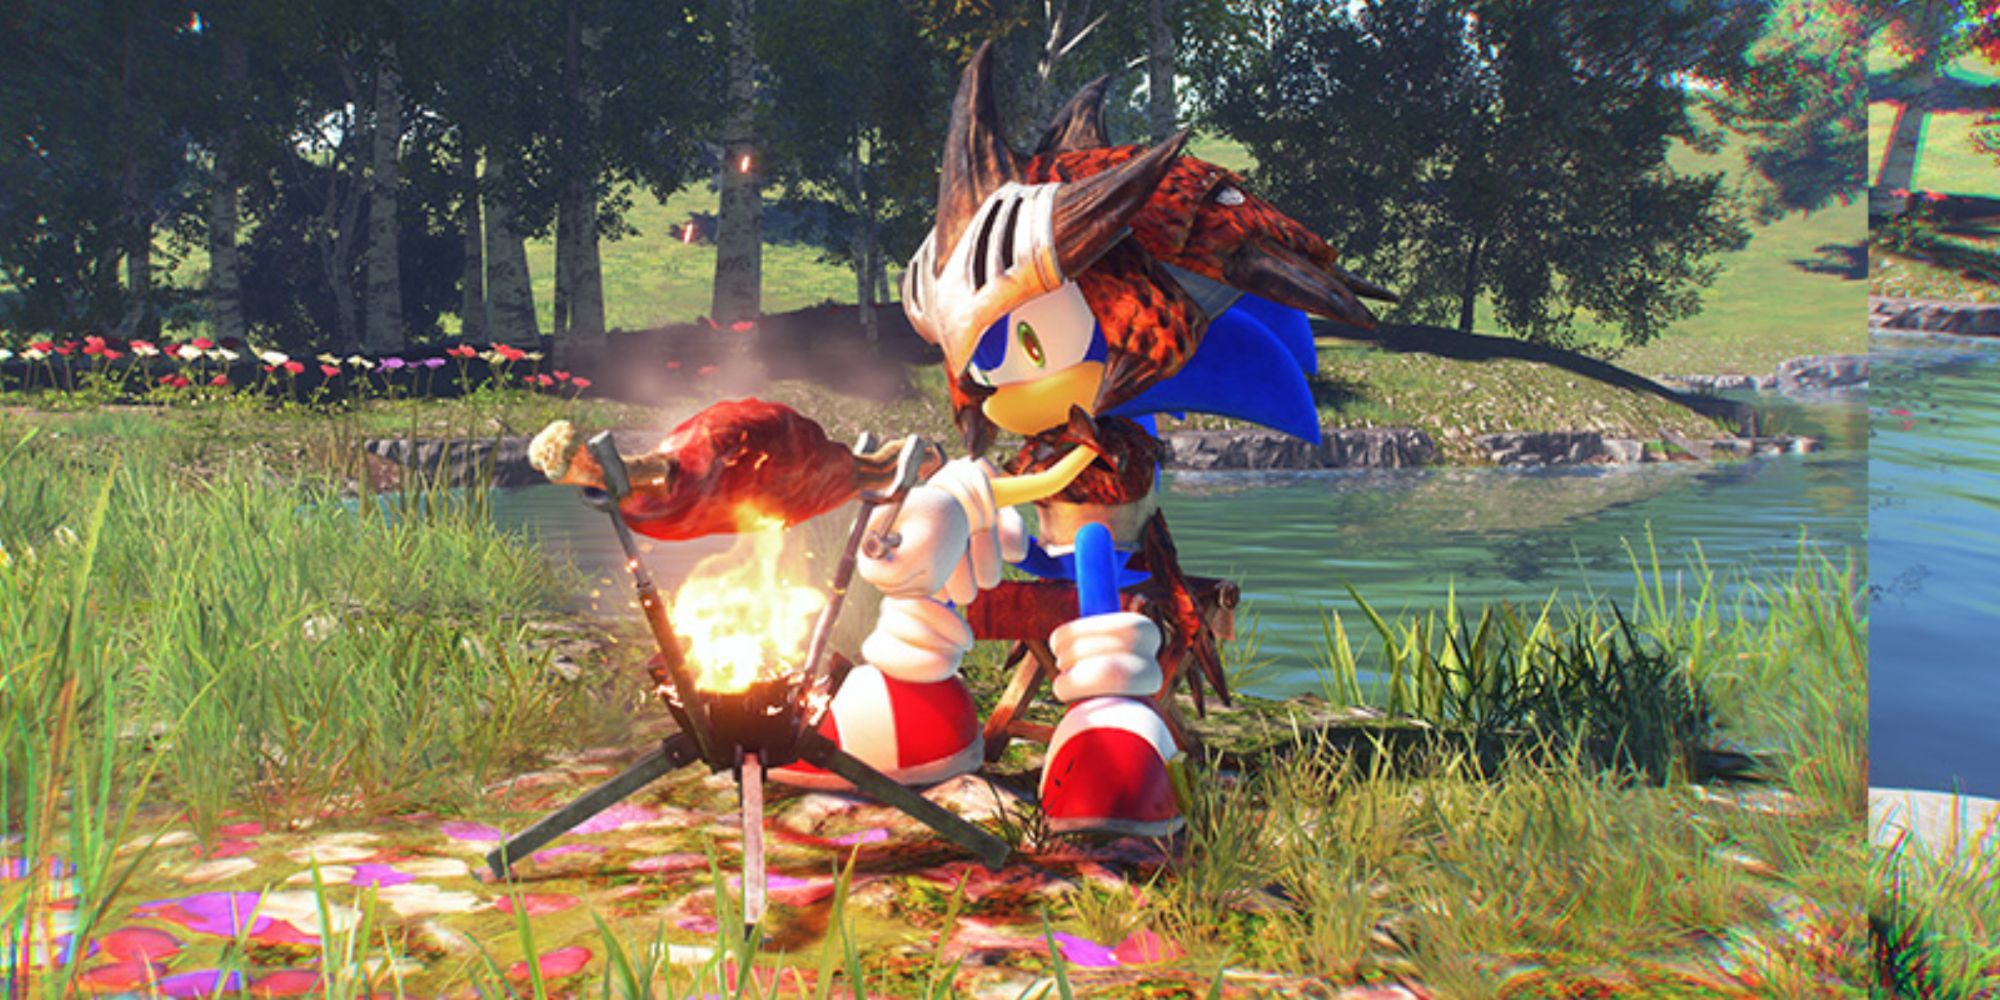 Sonic the Hedgehog wears Rathalos armor while cooking an animal in Monster Hunter-themed DLC for Sonic Frontiers.